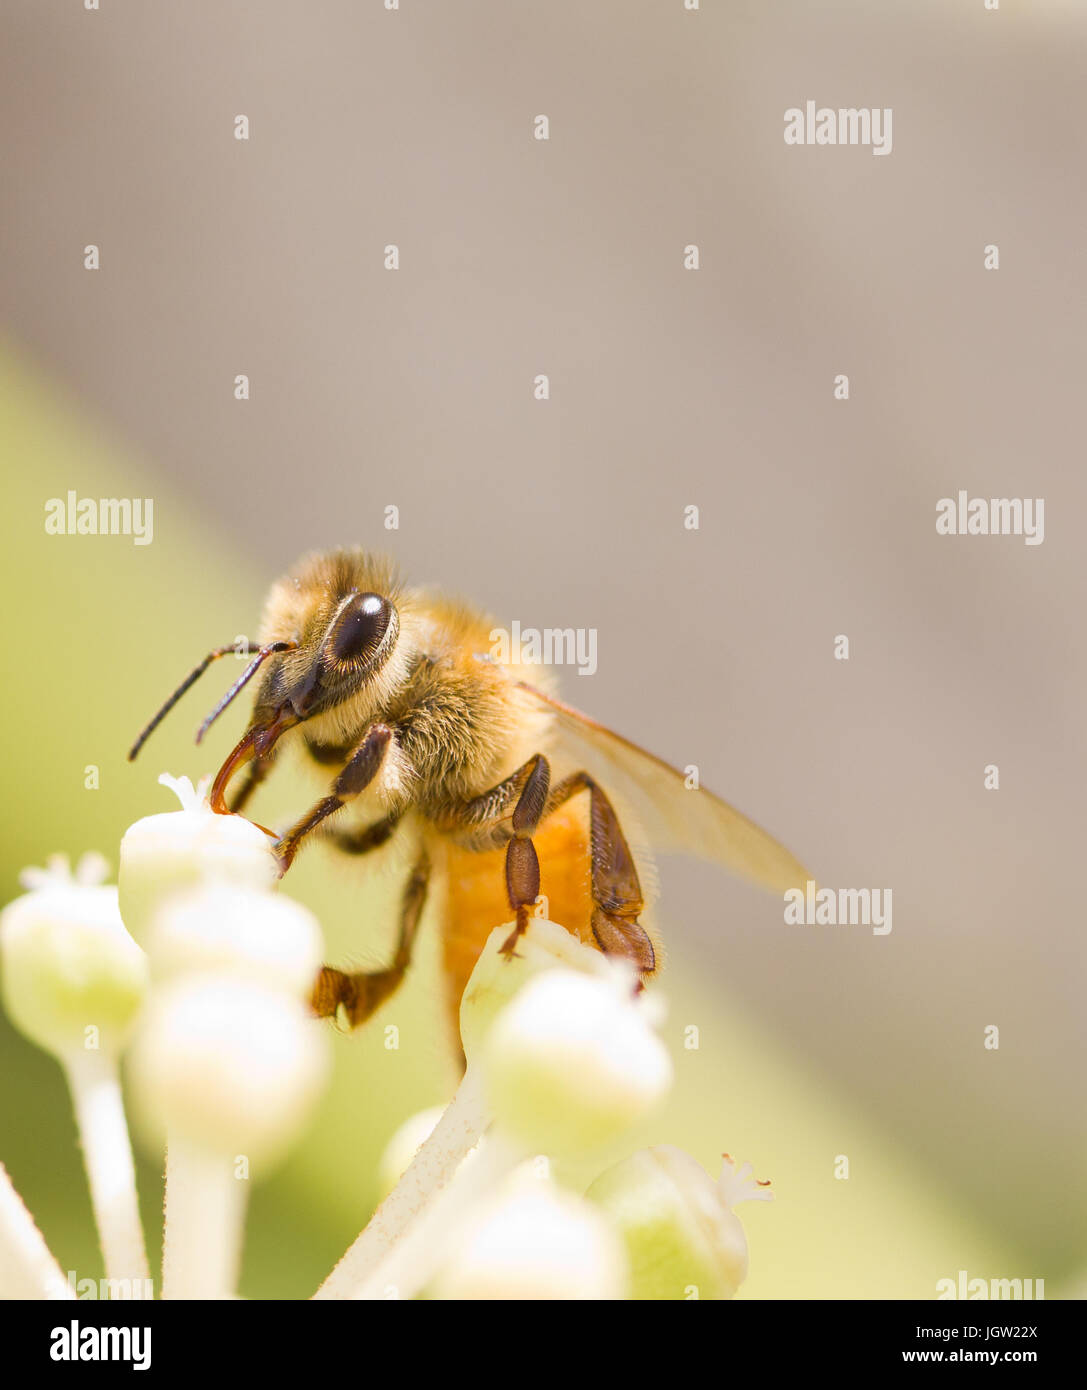 Bee collecting pollen on White flower with blurred green background photo Stock Photo